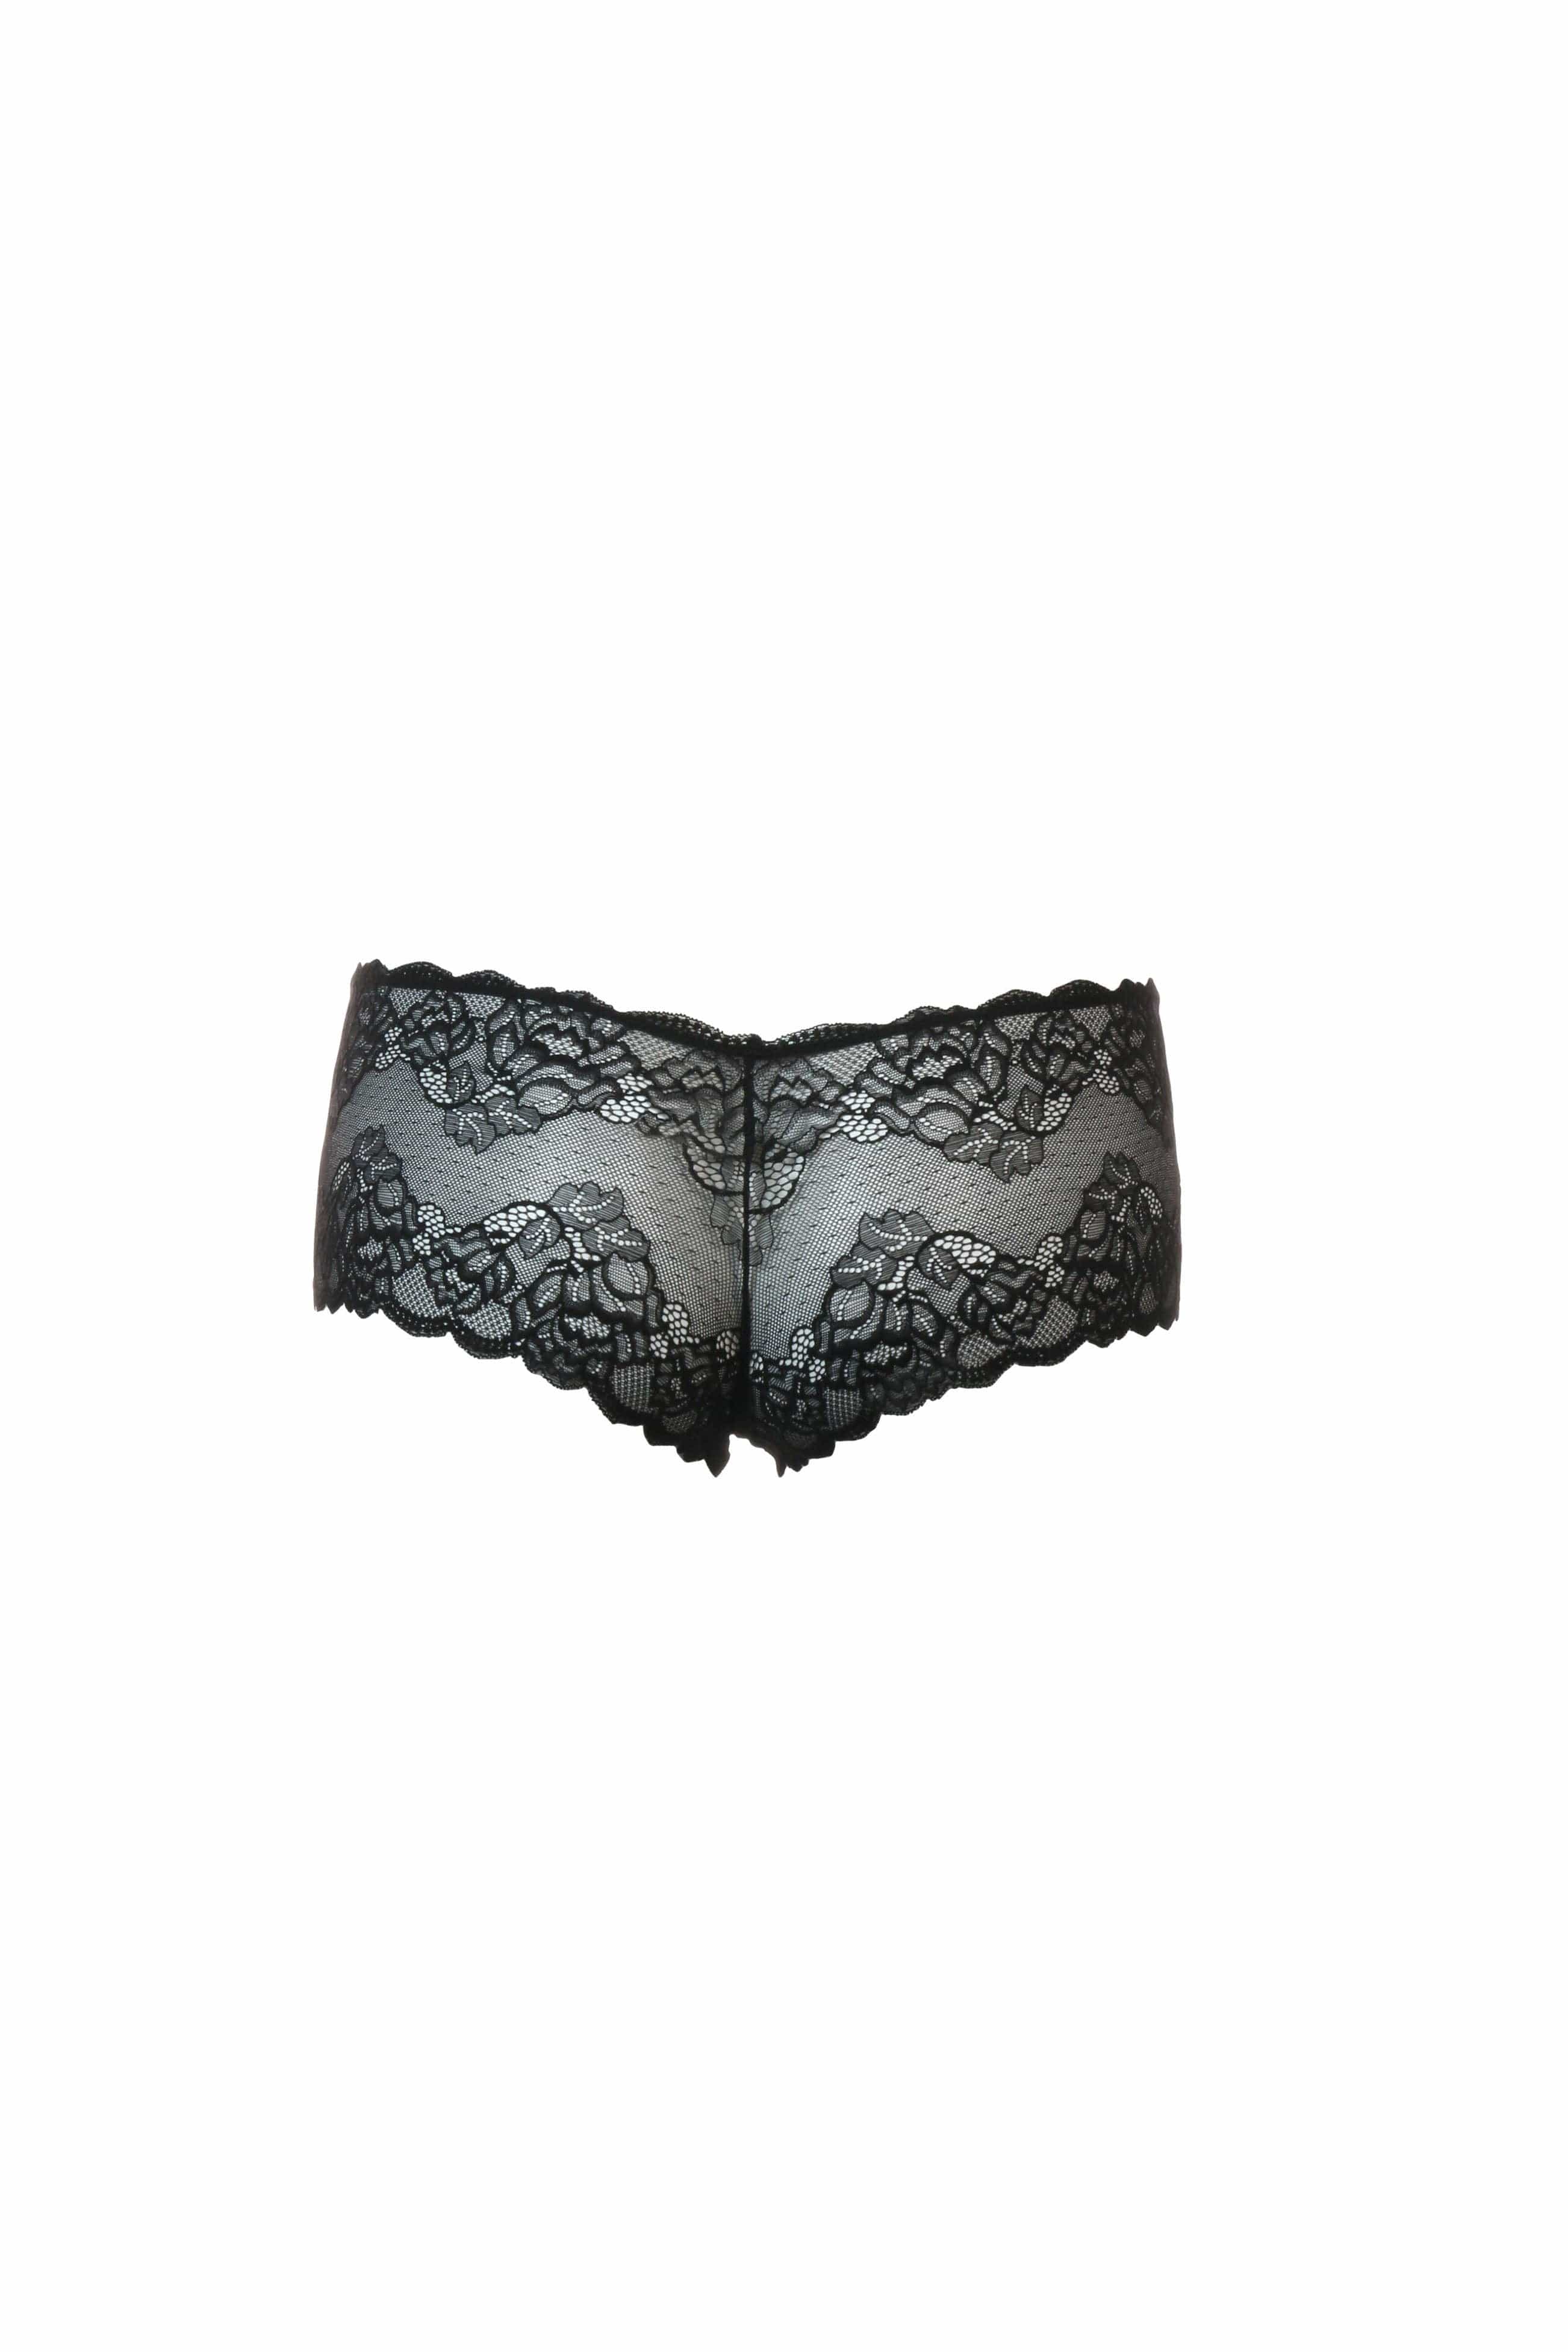 Lace Cheeky Panty- Tango Red - Chérie Amour